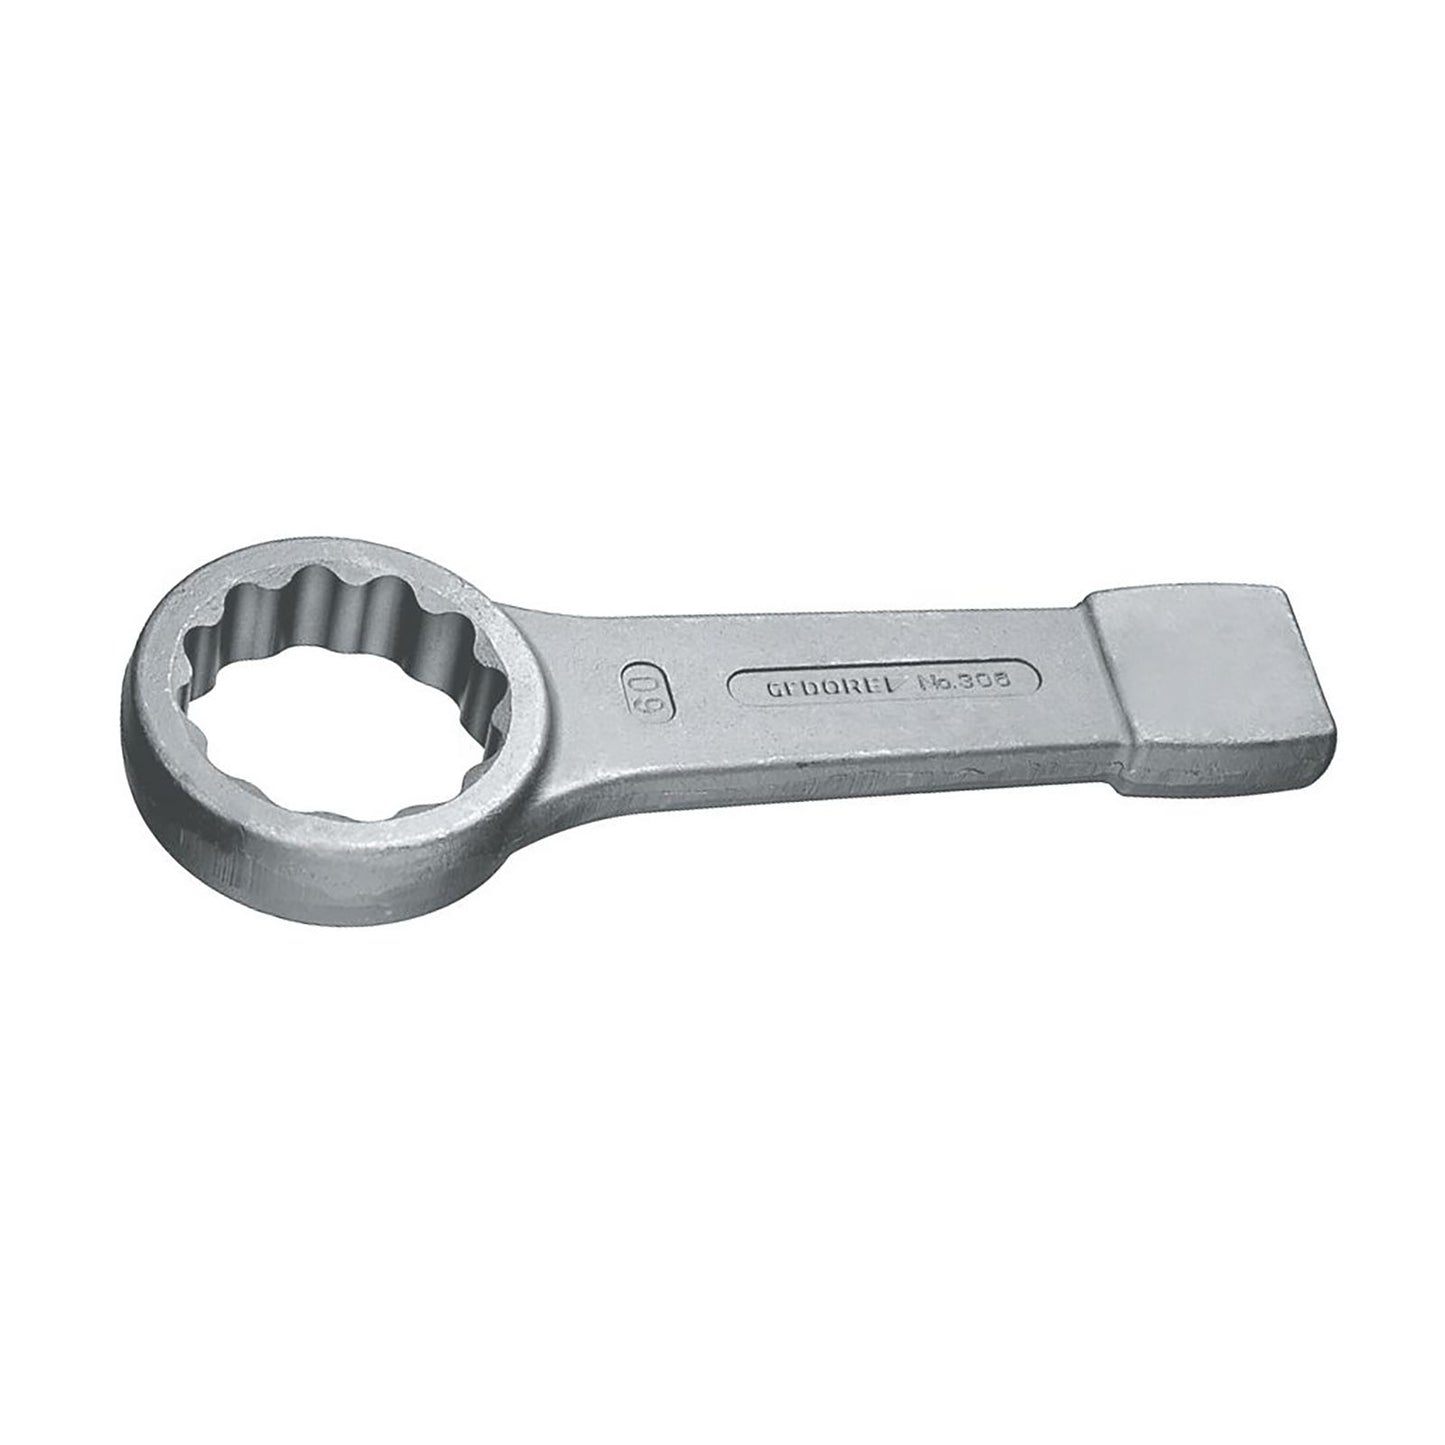 GEDORE 306 22 - Closed Strike Wrench, 22mm (1344331)